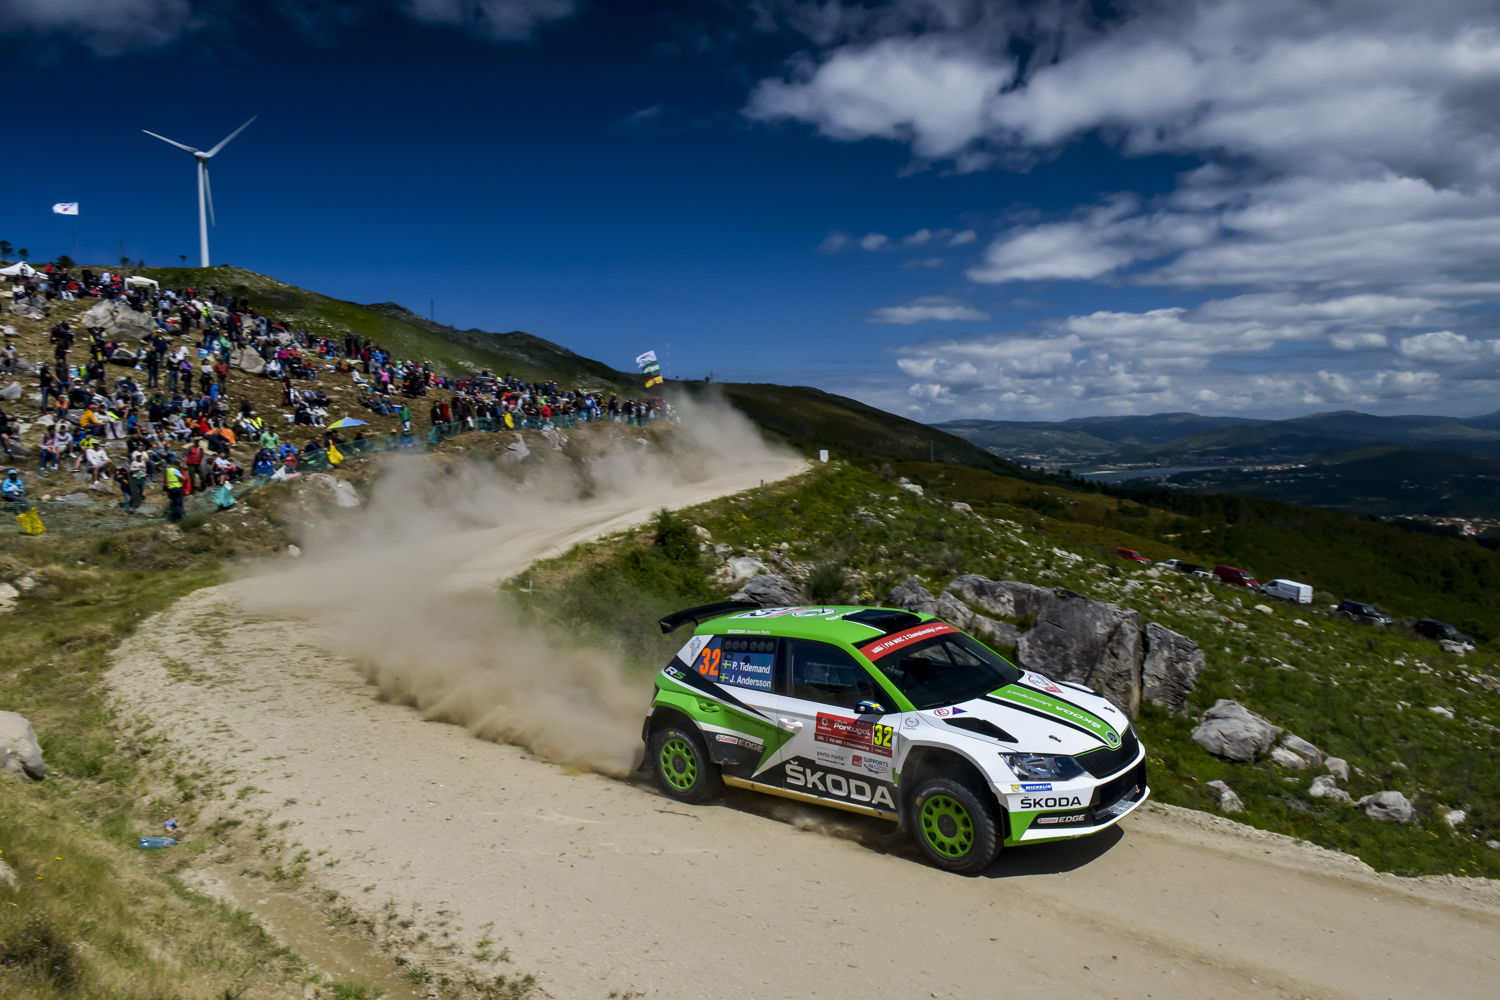 At Rally Hustopeče Pontus Tidemand/Jonas Andersson (ŠKODA FABIA R5) are aiming for their first victory in the Czech Republic.